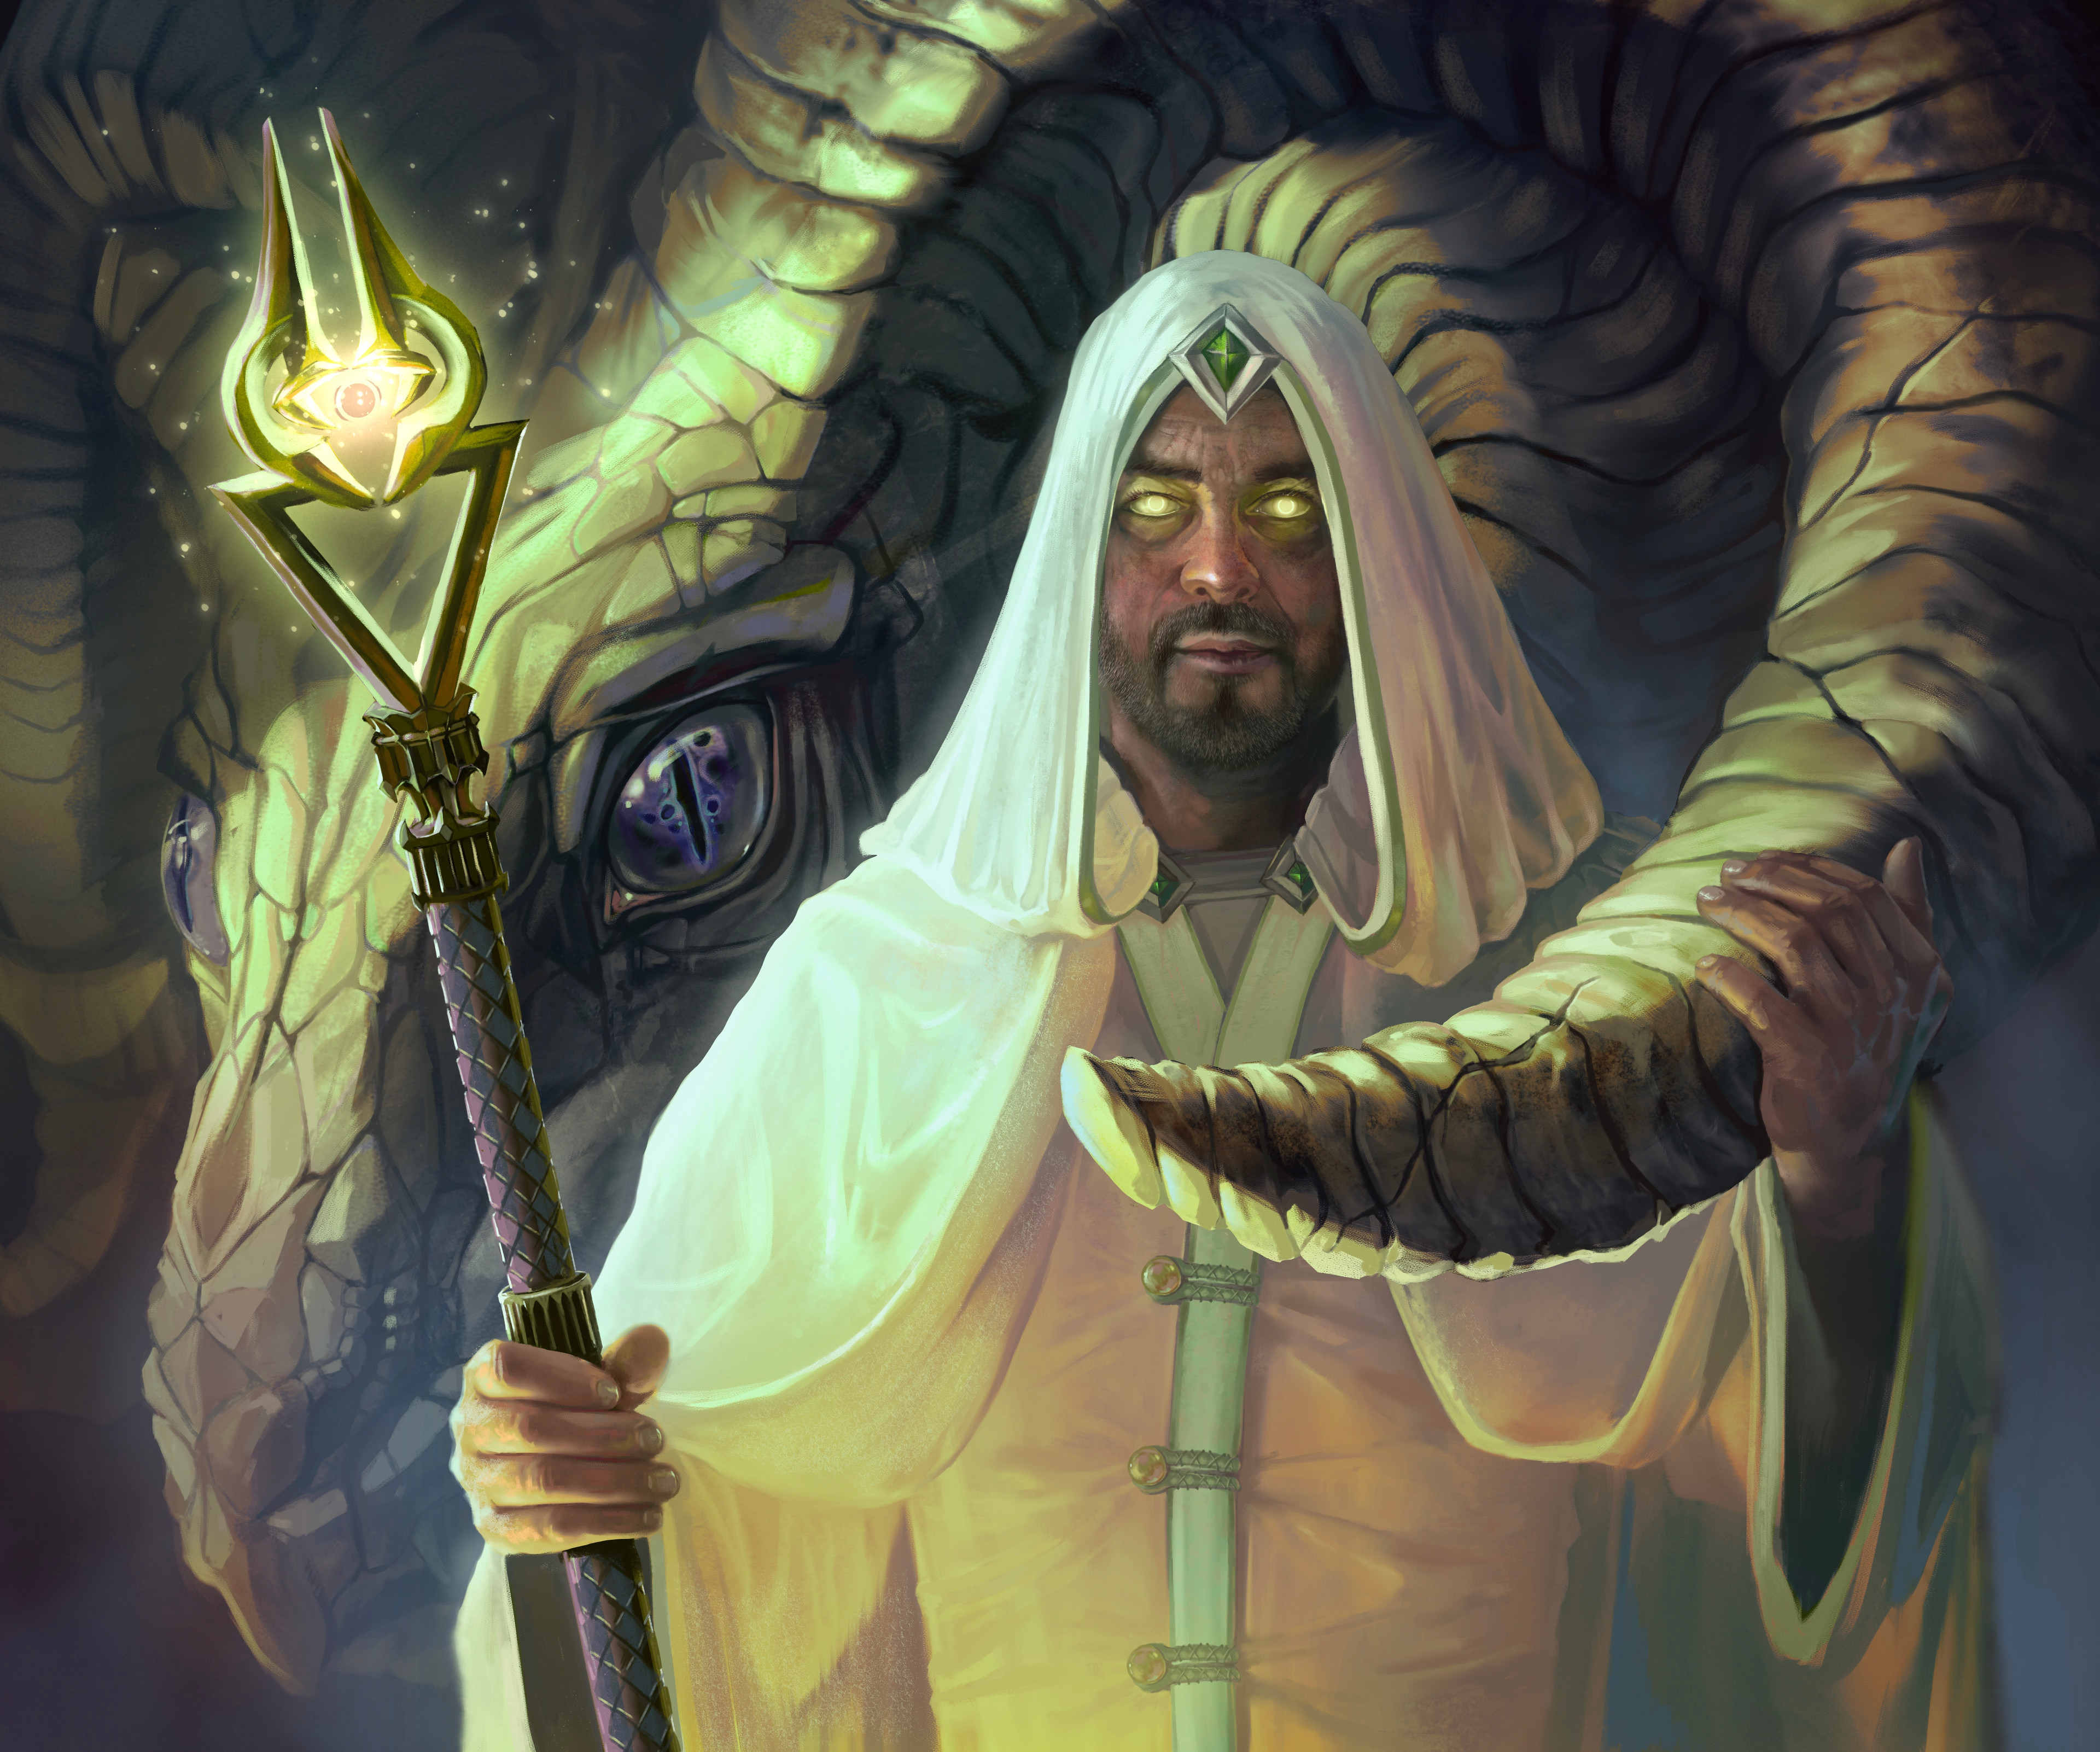 MTG Style card art of Hallet and Tulan.